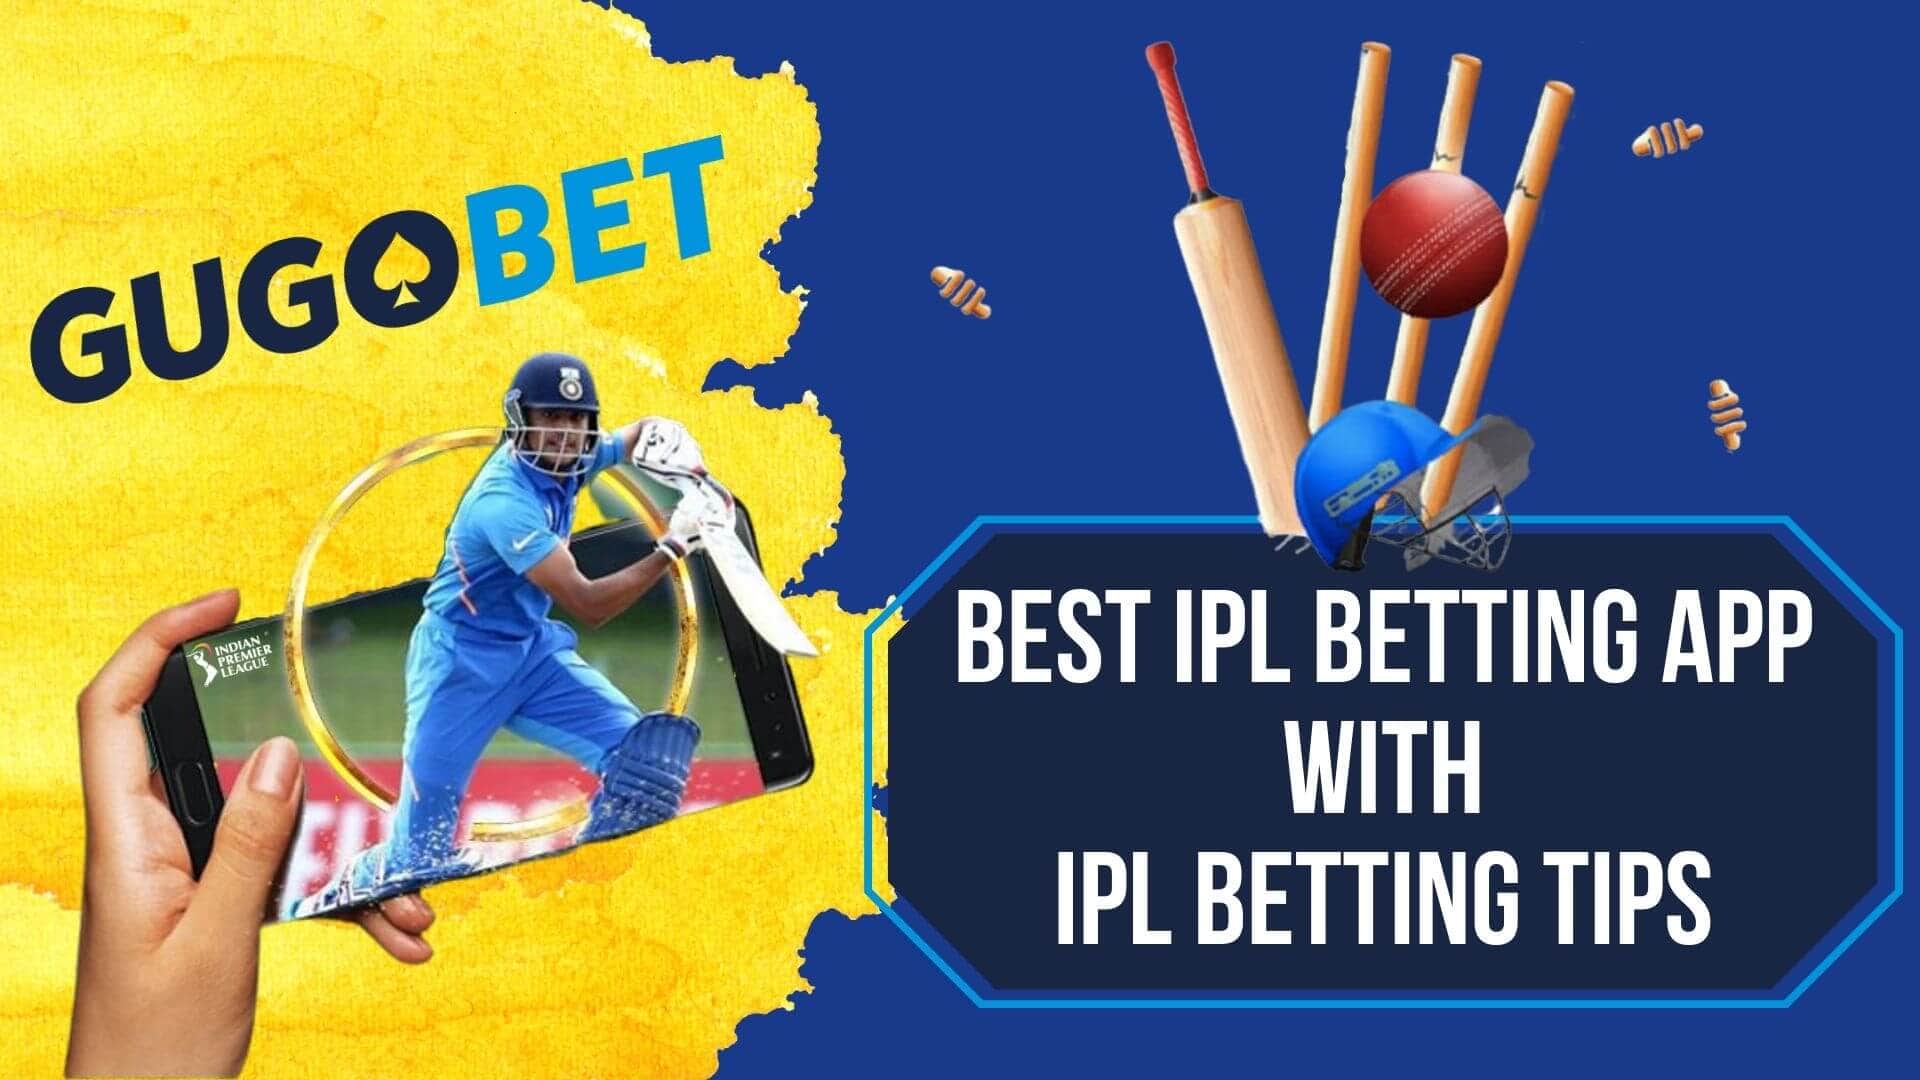 The Betting App For Ipl Mystery Revealed